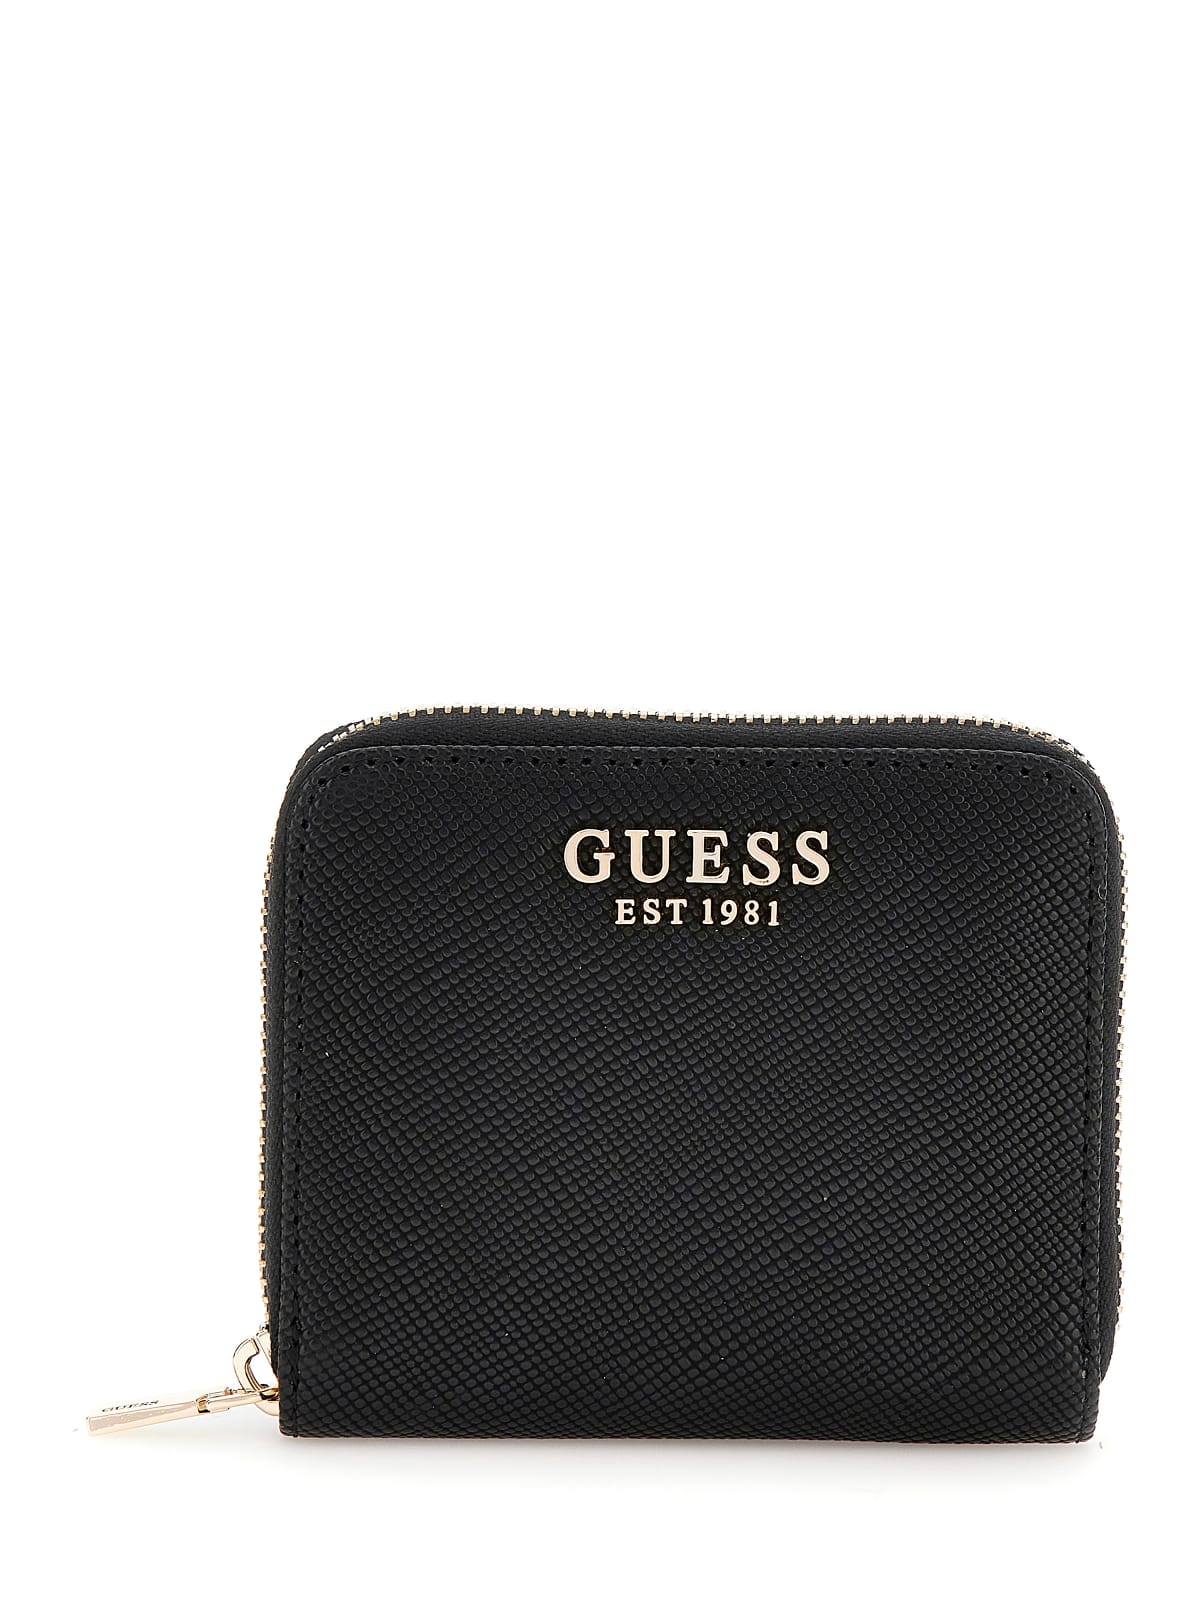 Guess LAUREL SLG SMALL ZIP AROUND